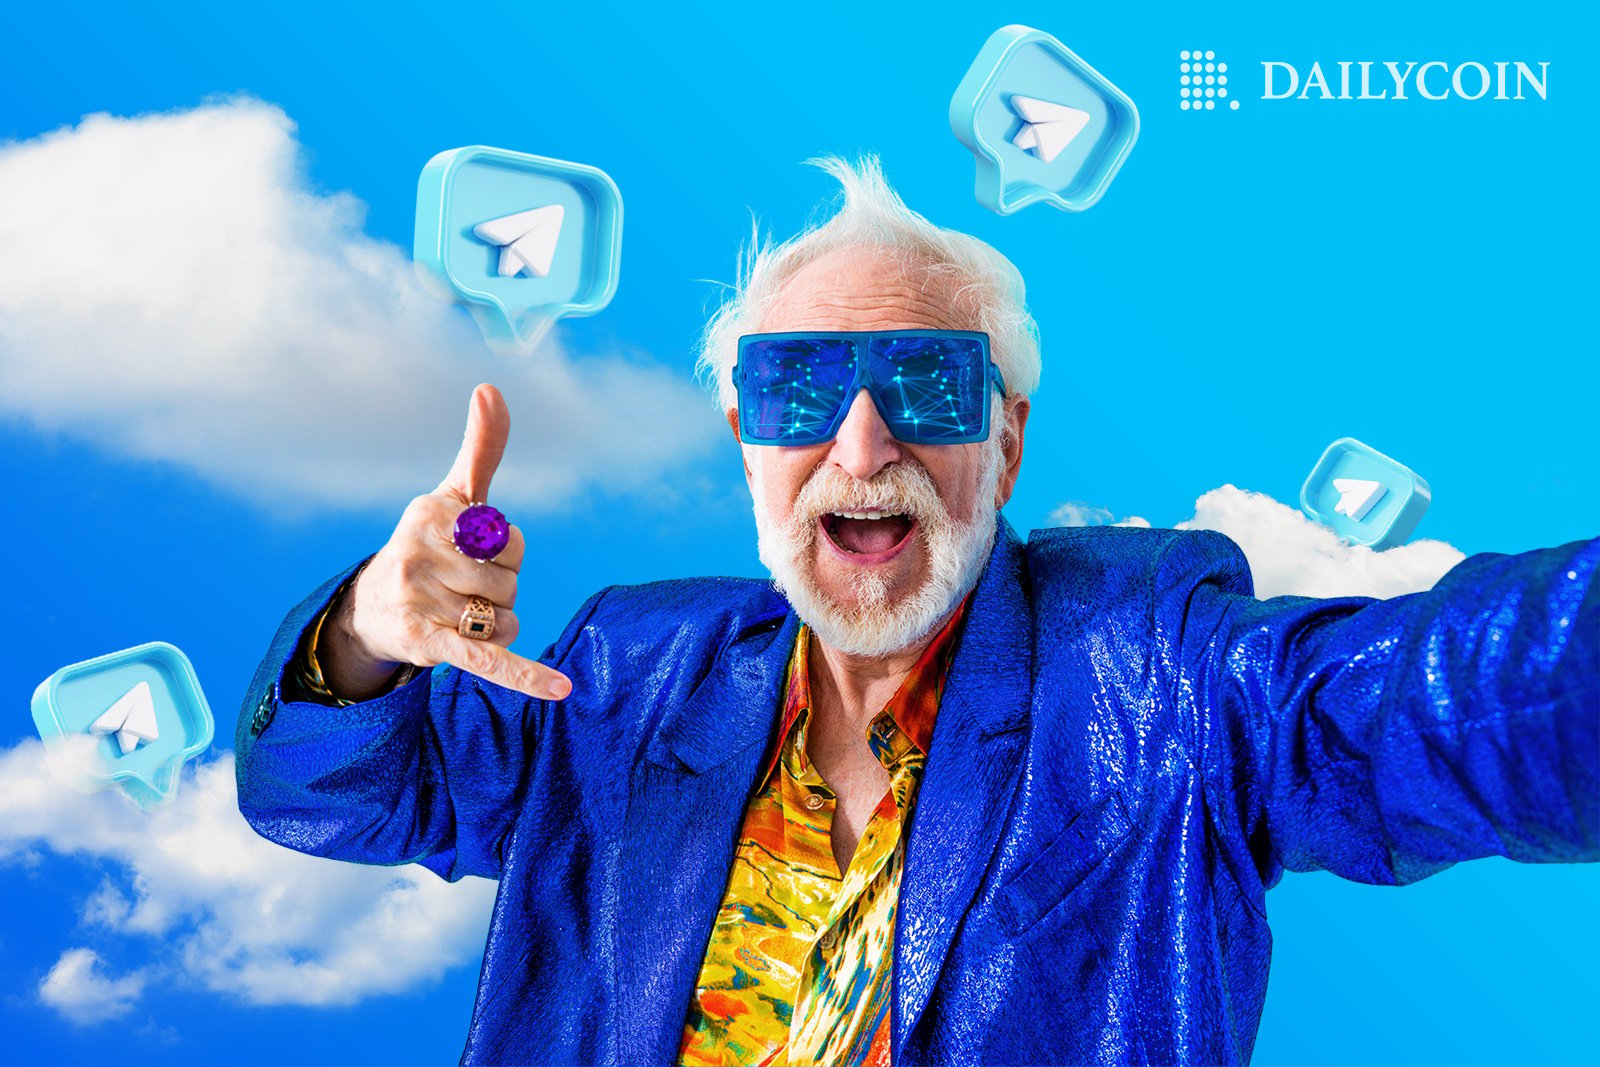 An old man with blue jacket taking a selfie in front of flying Telegram logos.